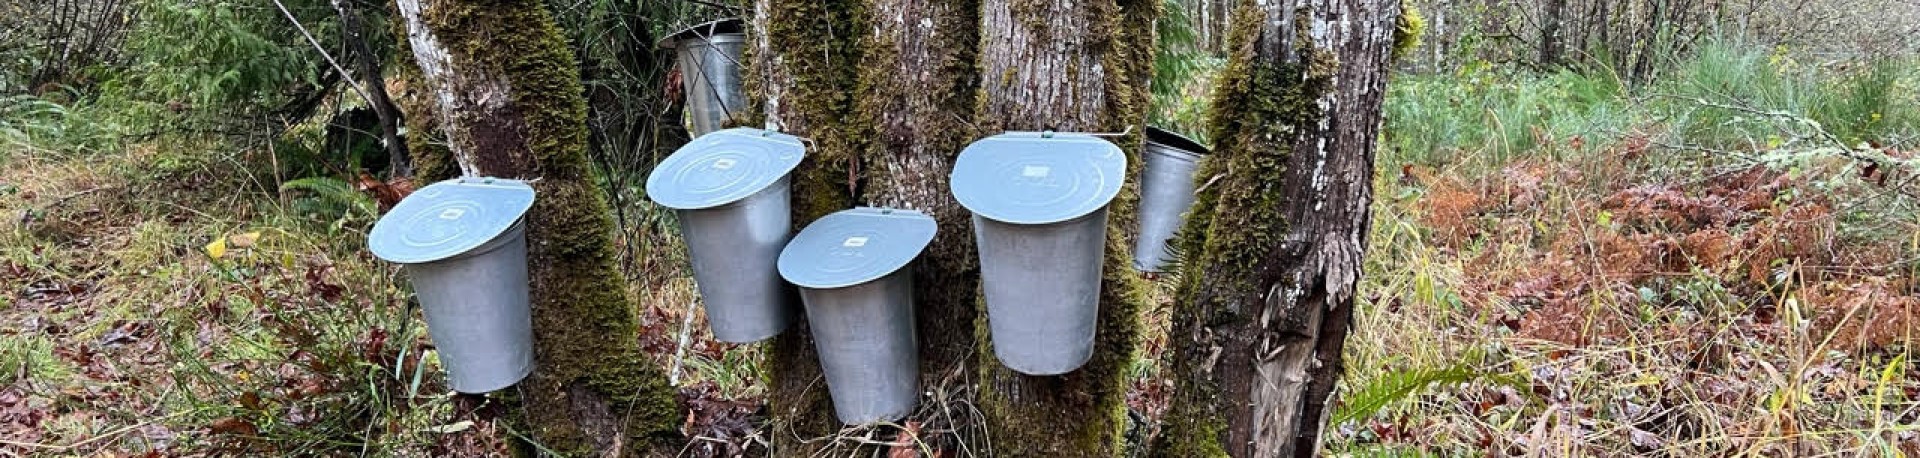 WAITLIST – Winter Maple Sugaring Class and Demonstration